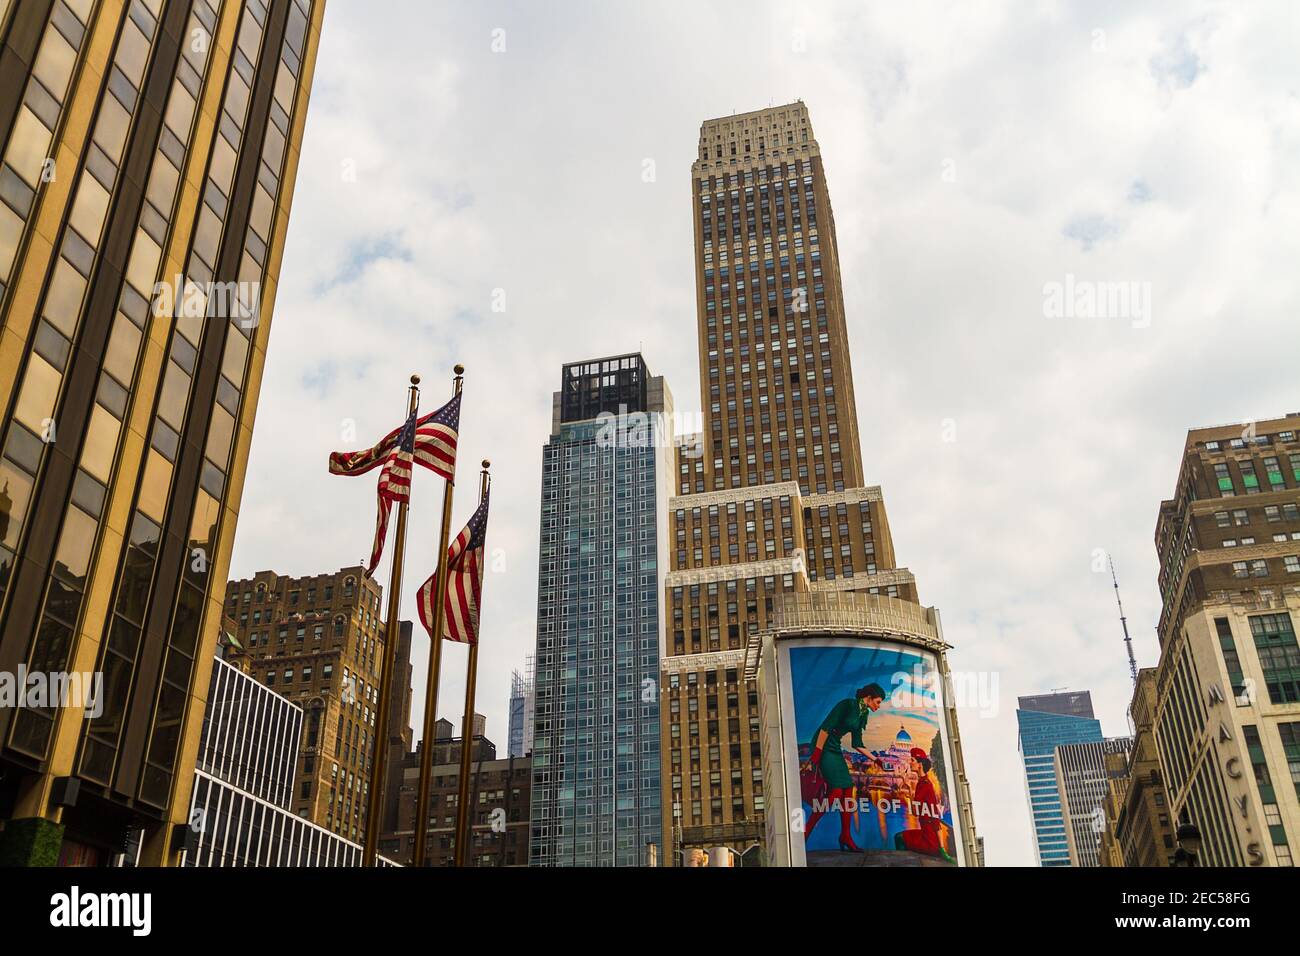 American flags and buildings on 7th Avenue while going to Fashion Avenue and the advertisement billboard written 'Made of Italy' on it Stock Photo